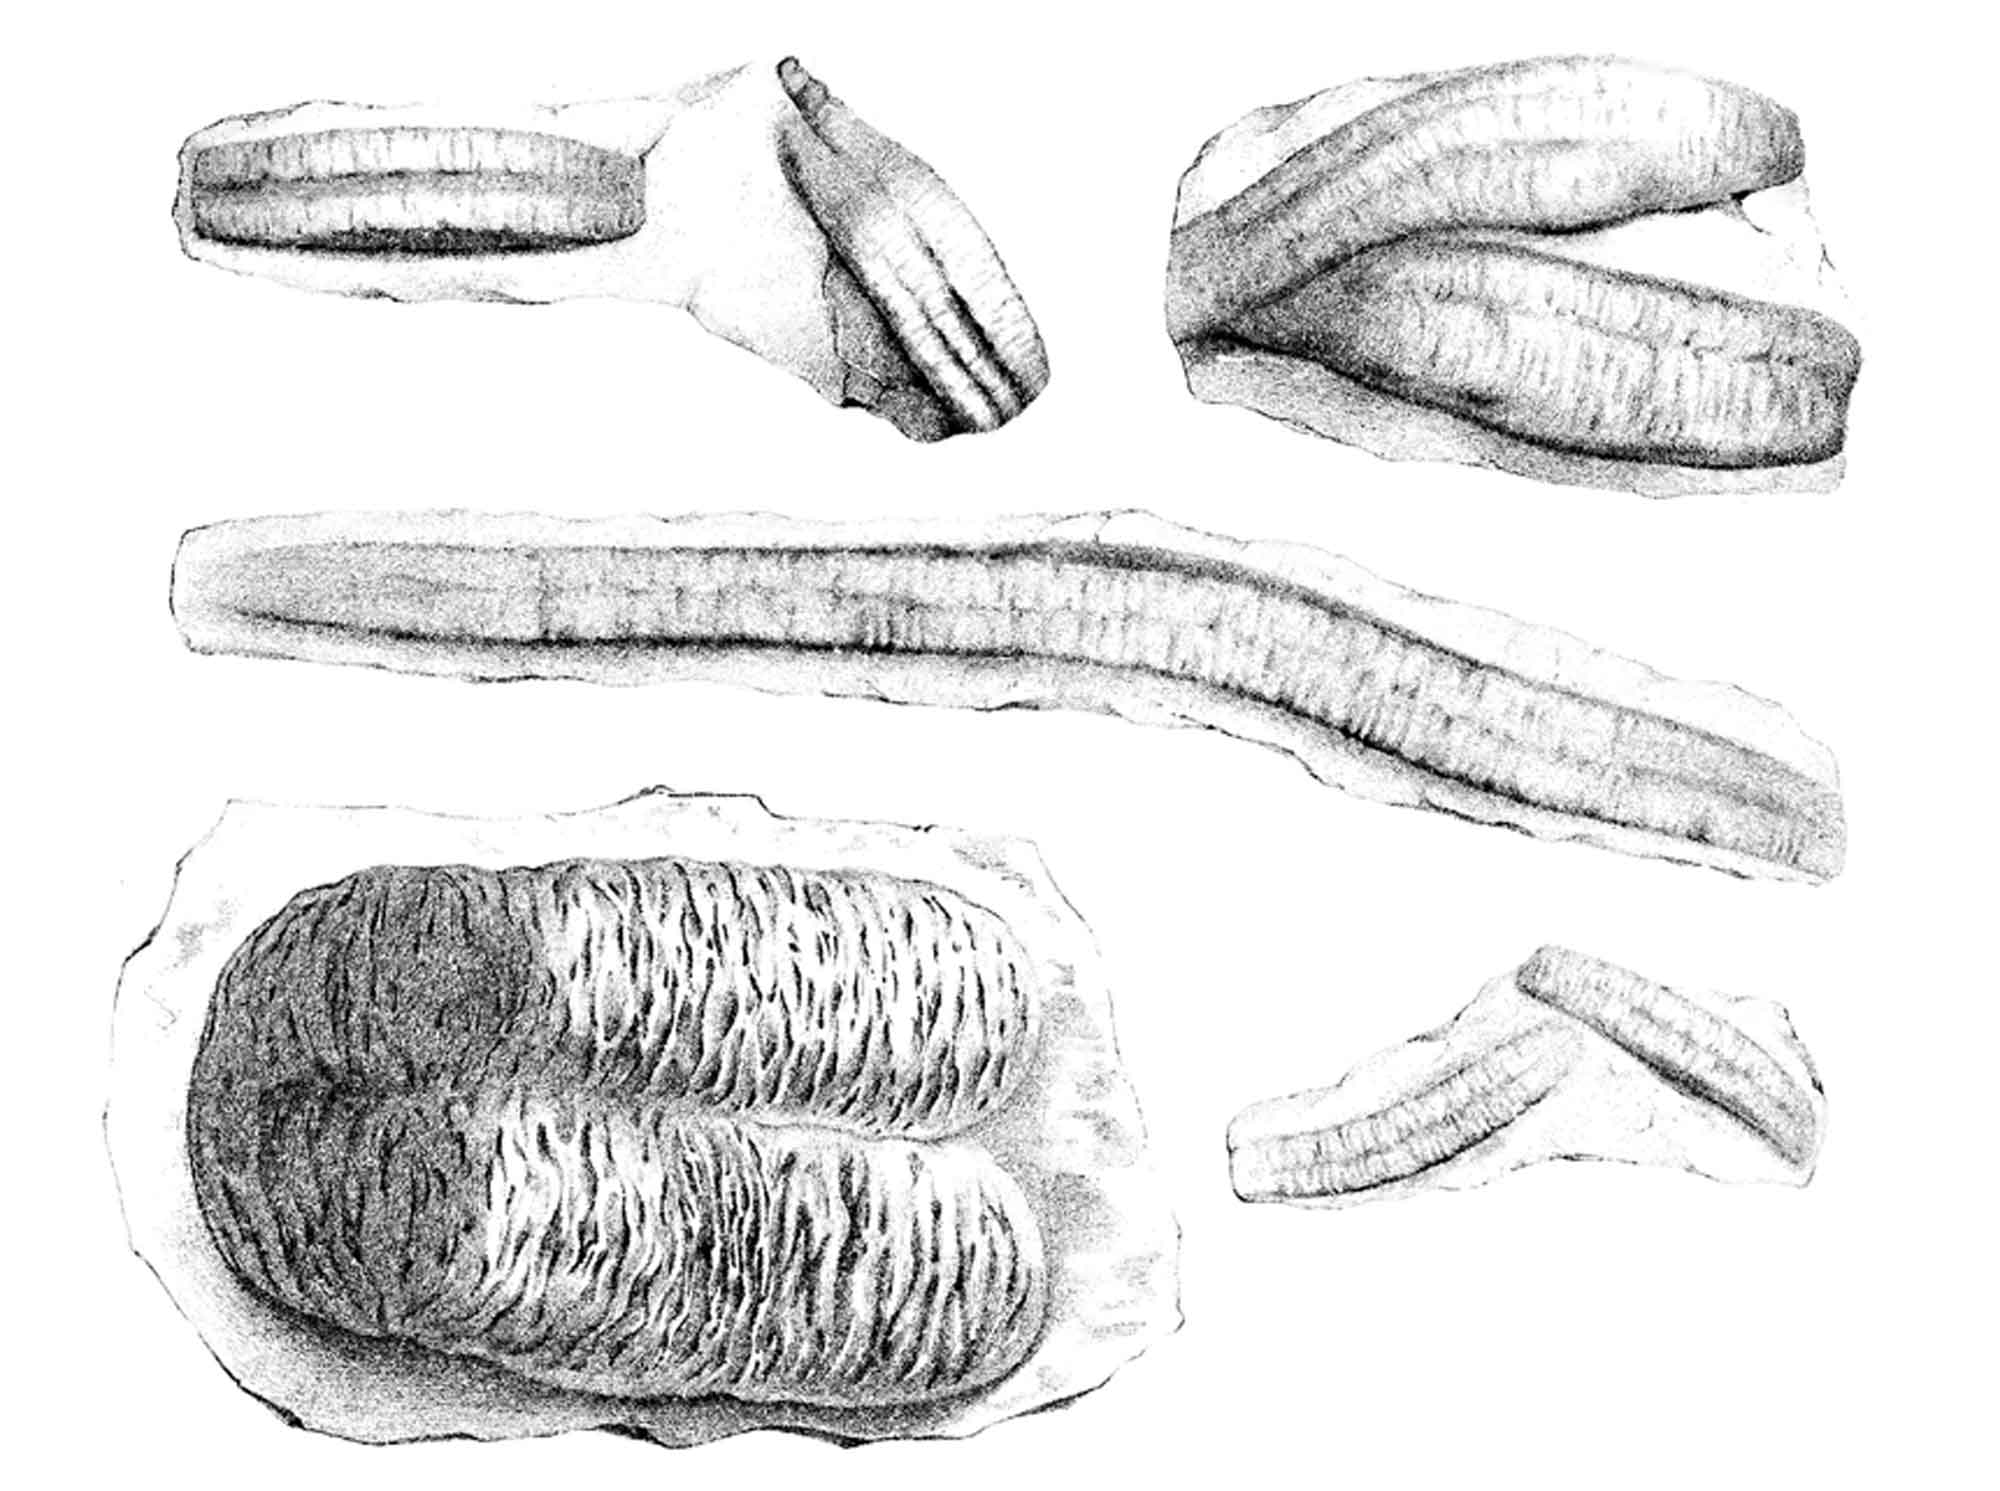 Drawings of trace fossils associated with trilobites from Palaeontology of New York volume 2, published 1852.